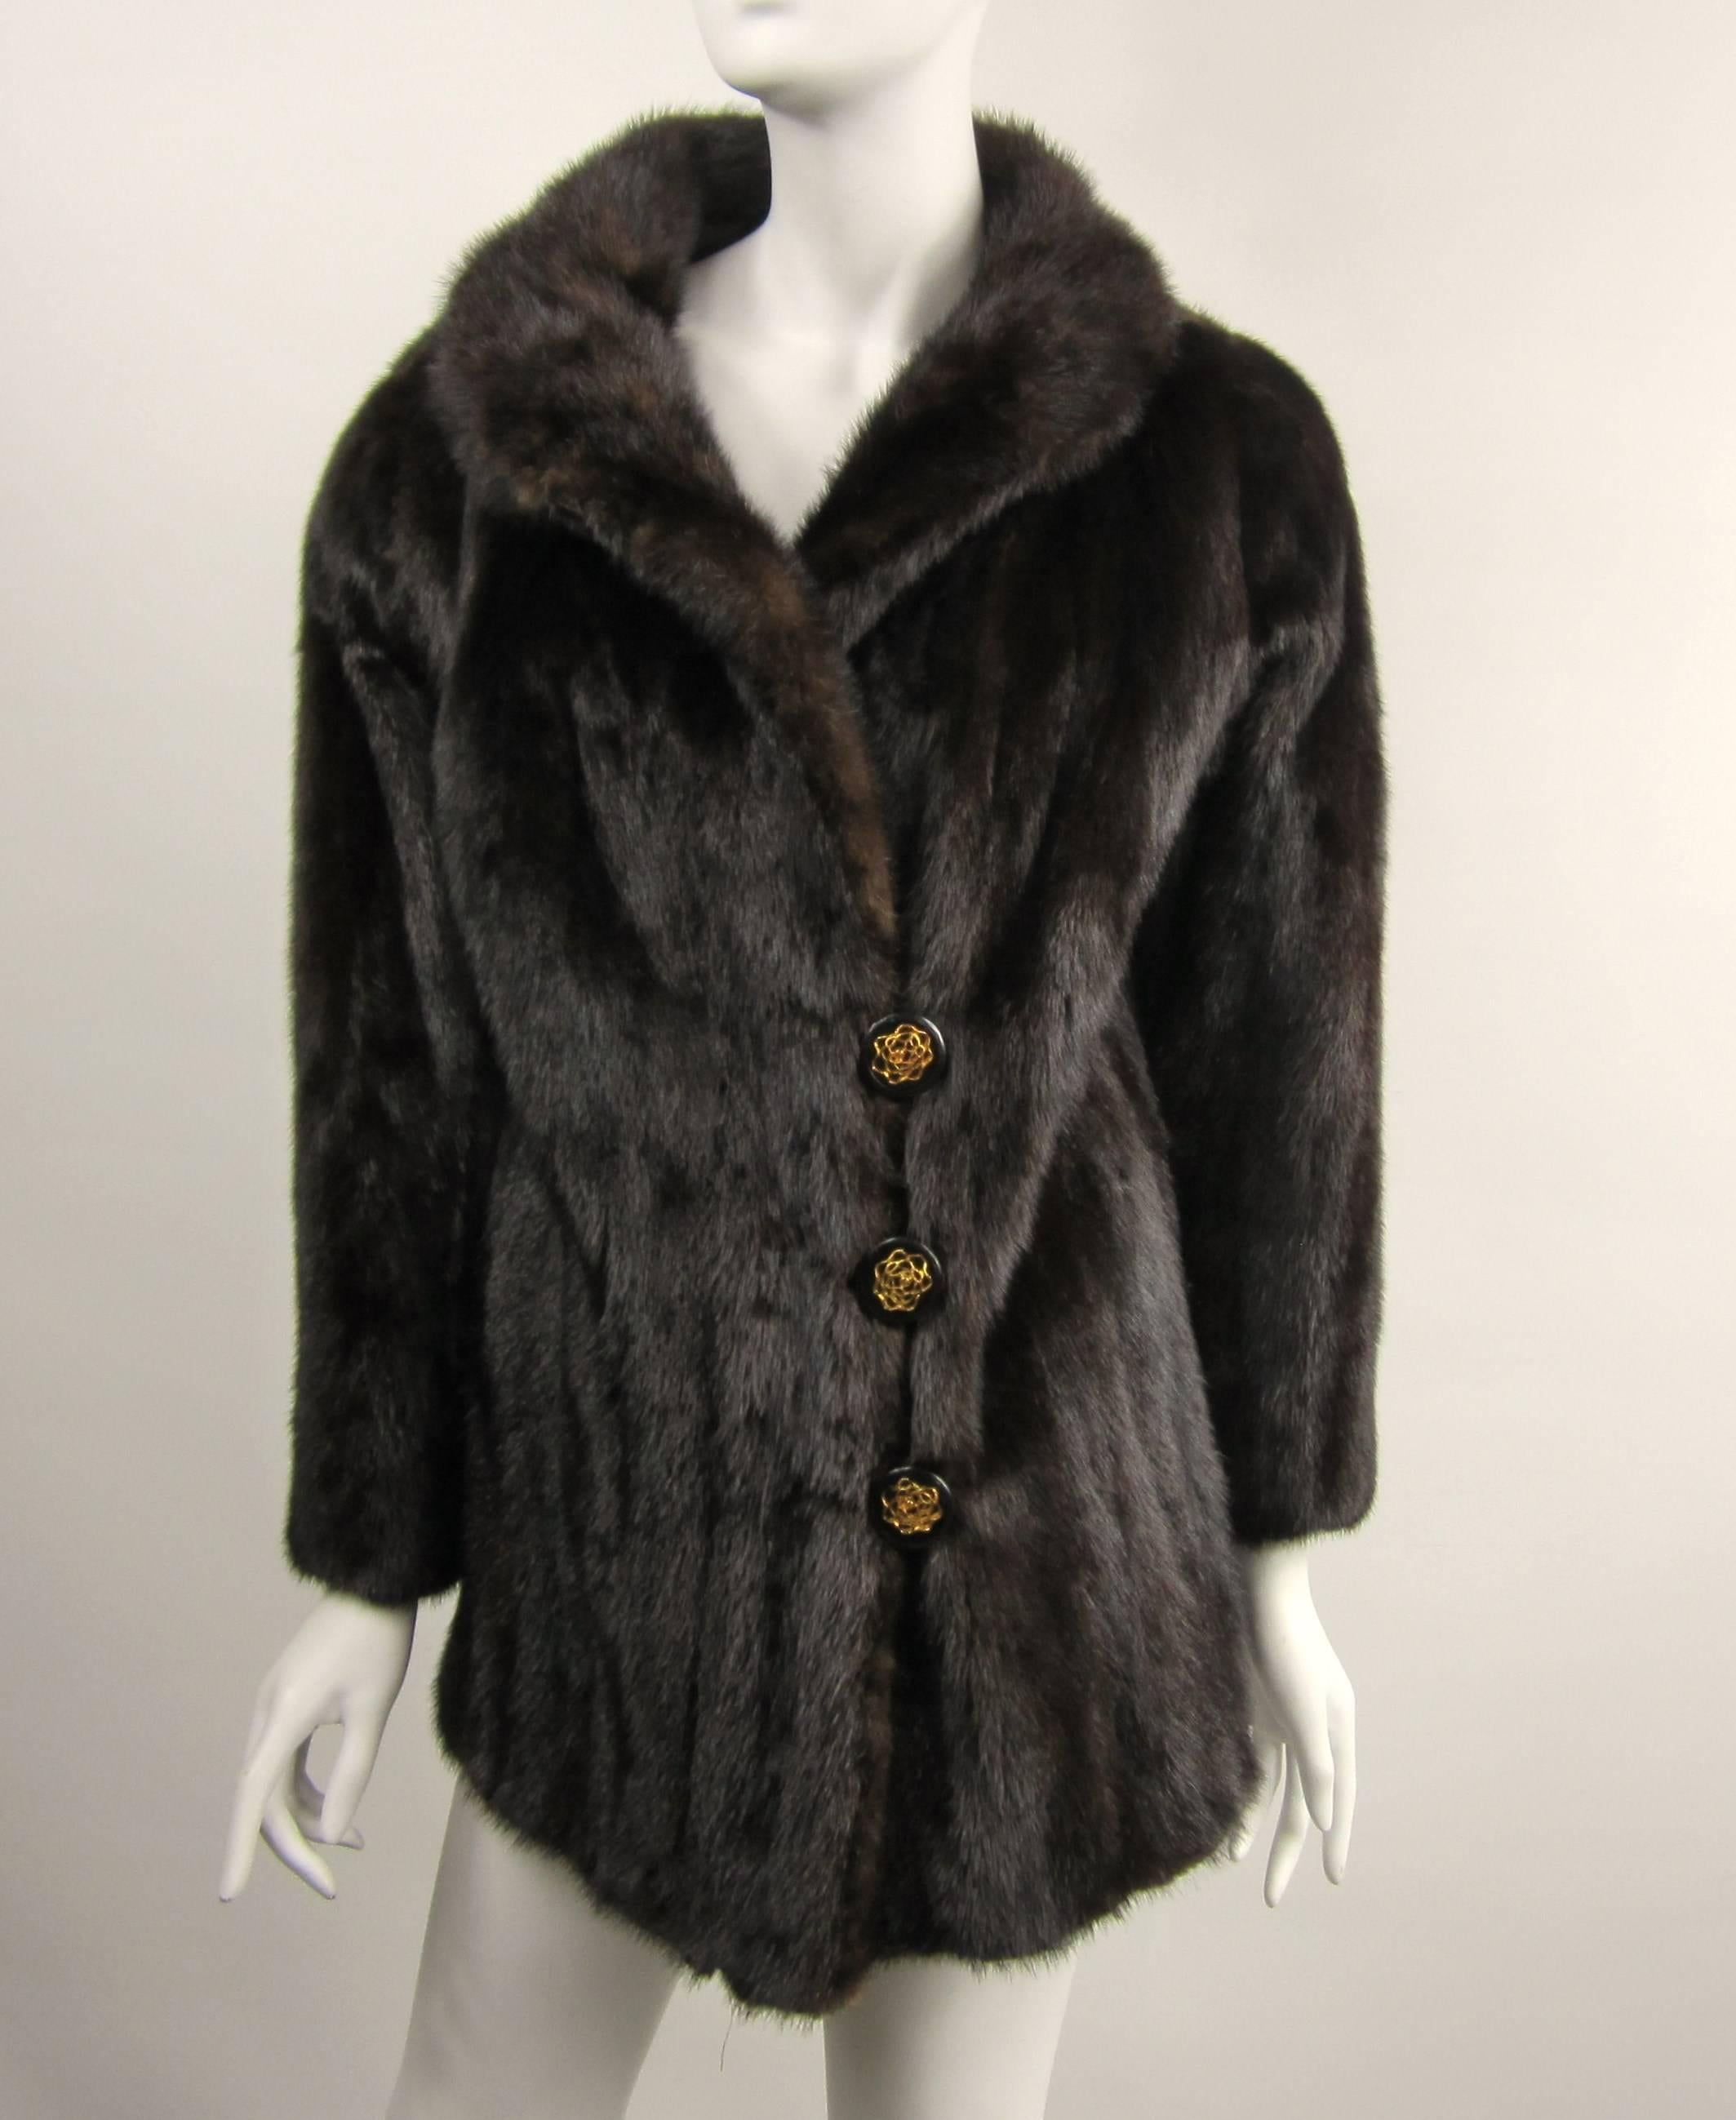  Ranch Mink Fur Coat & Jacket Large w/ Zippered Bottom 2 In 1  In Excellent Condition For Sale In Wallkill, NY